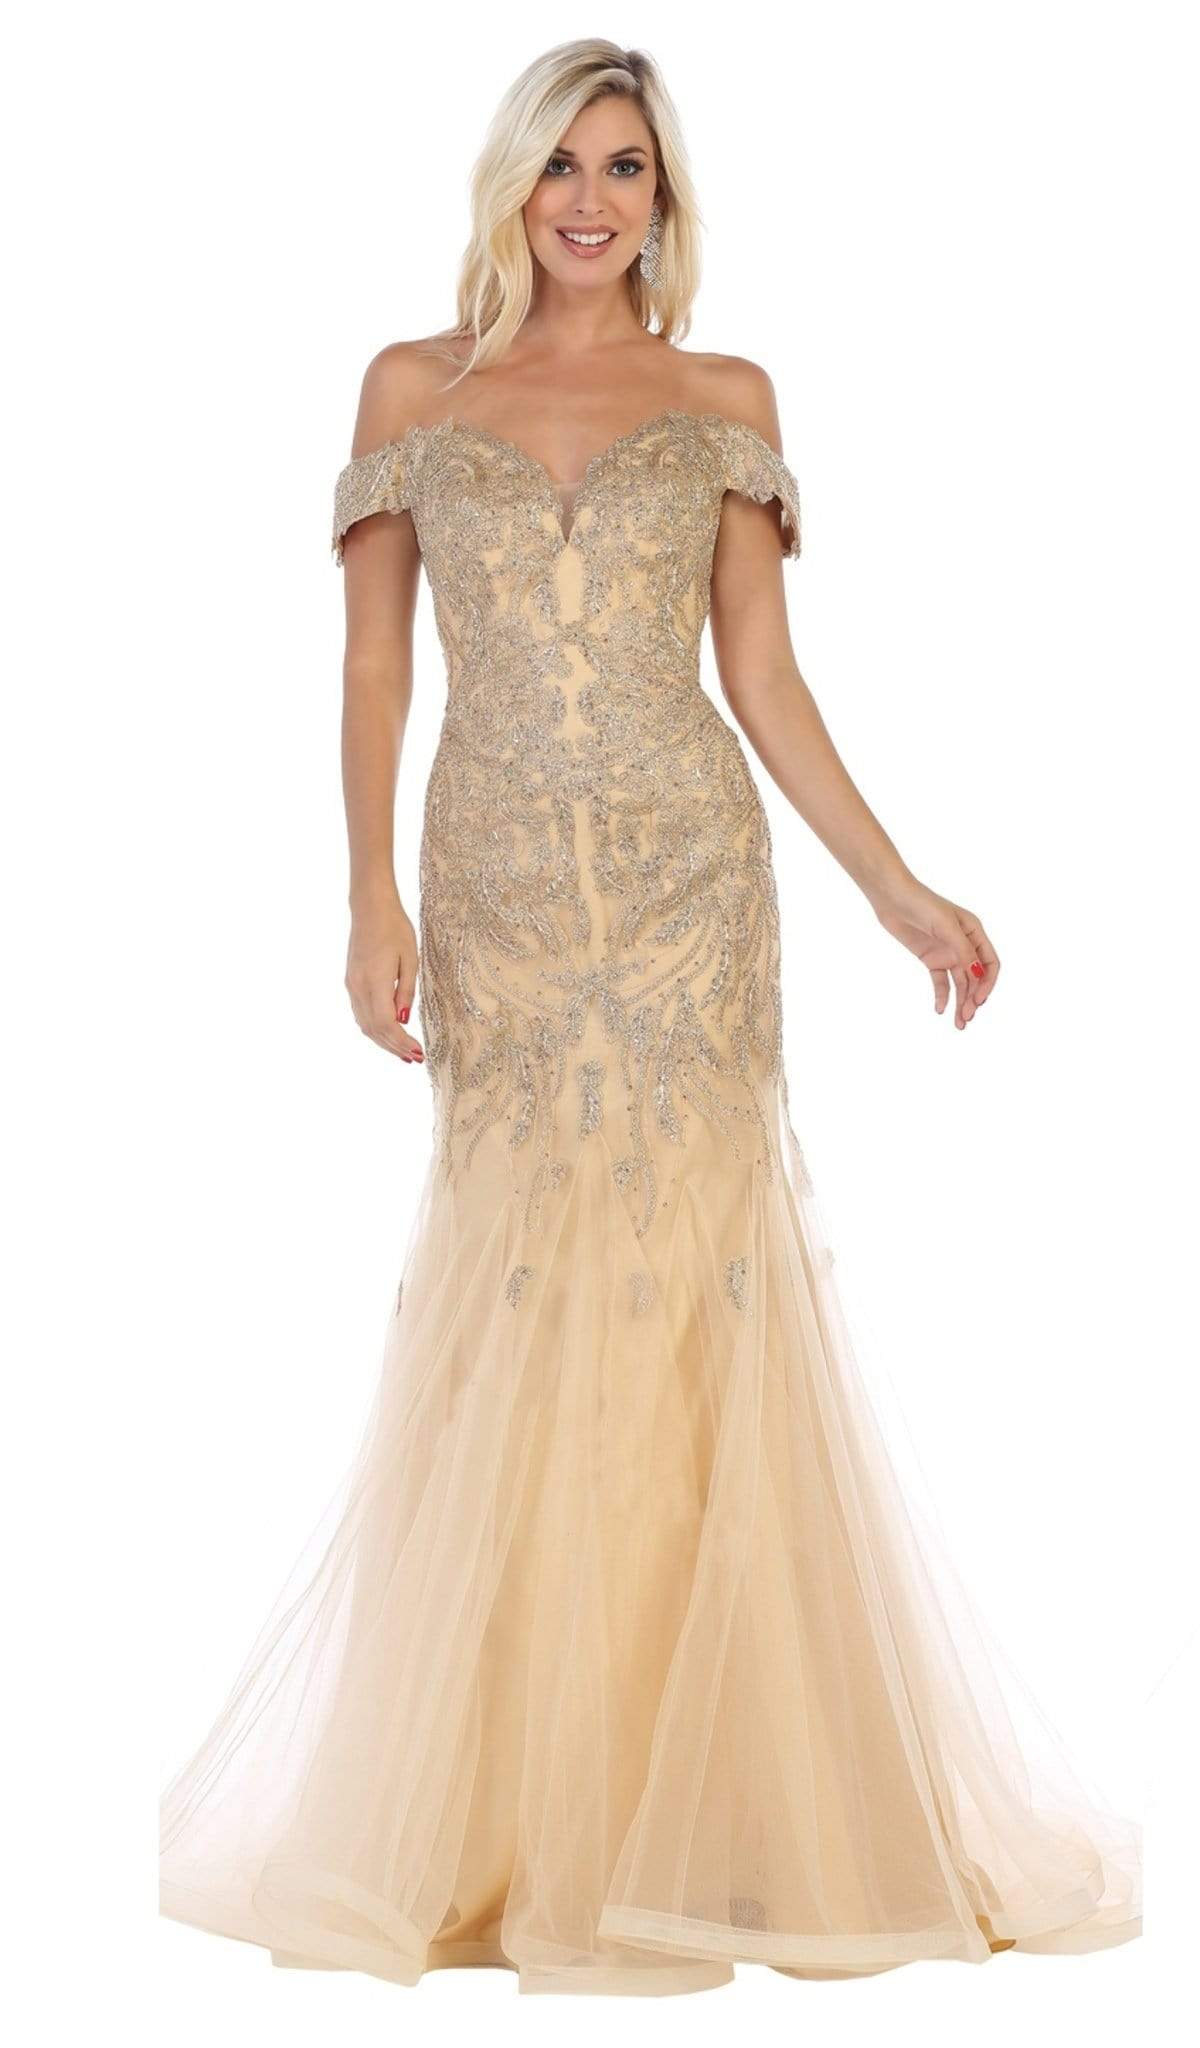 May Queen - RQ7705 Foliage Appliqued Plunging Off Shoulder Gown Evening Dresses 4 / Gold